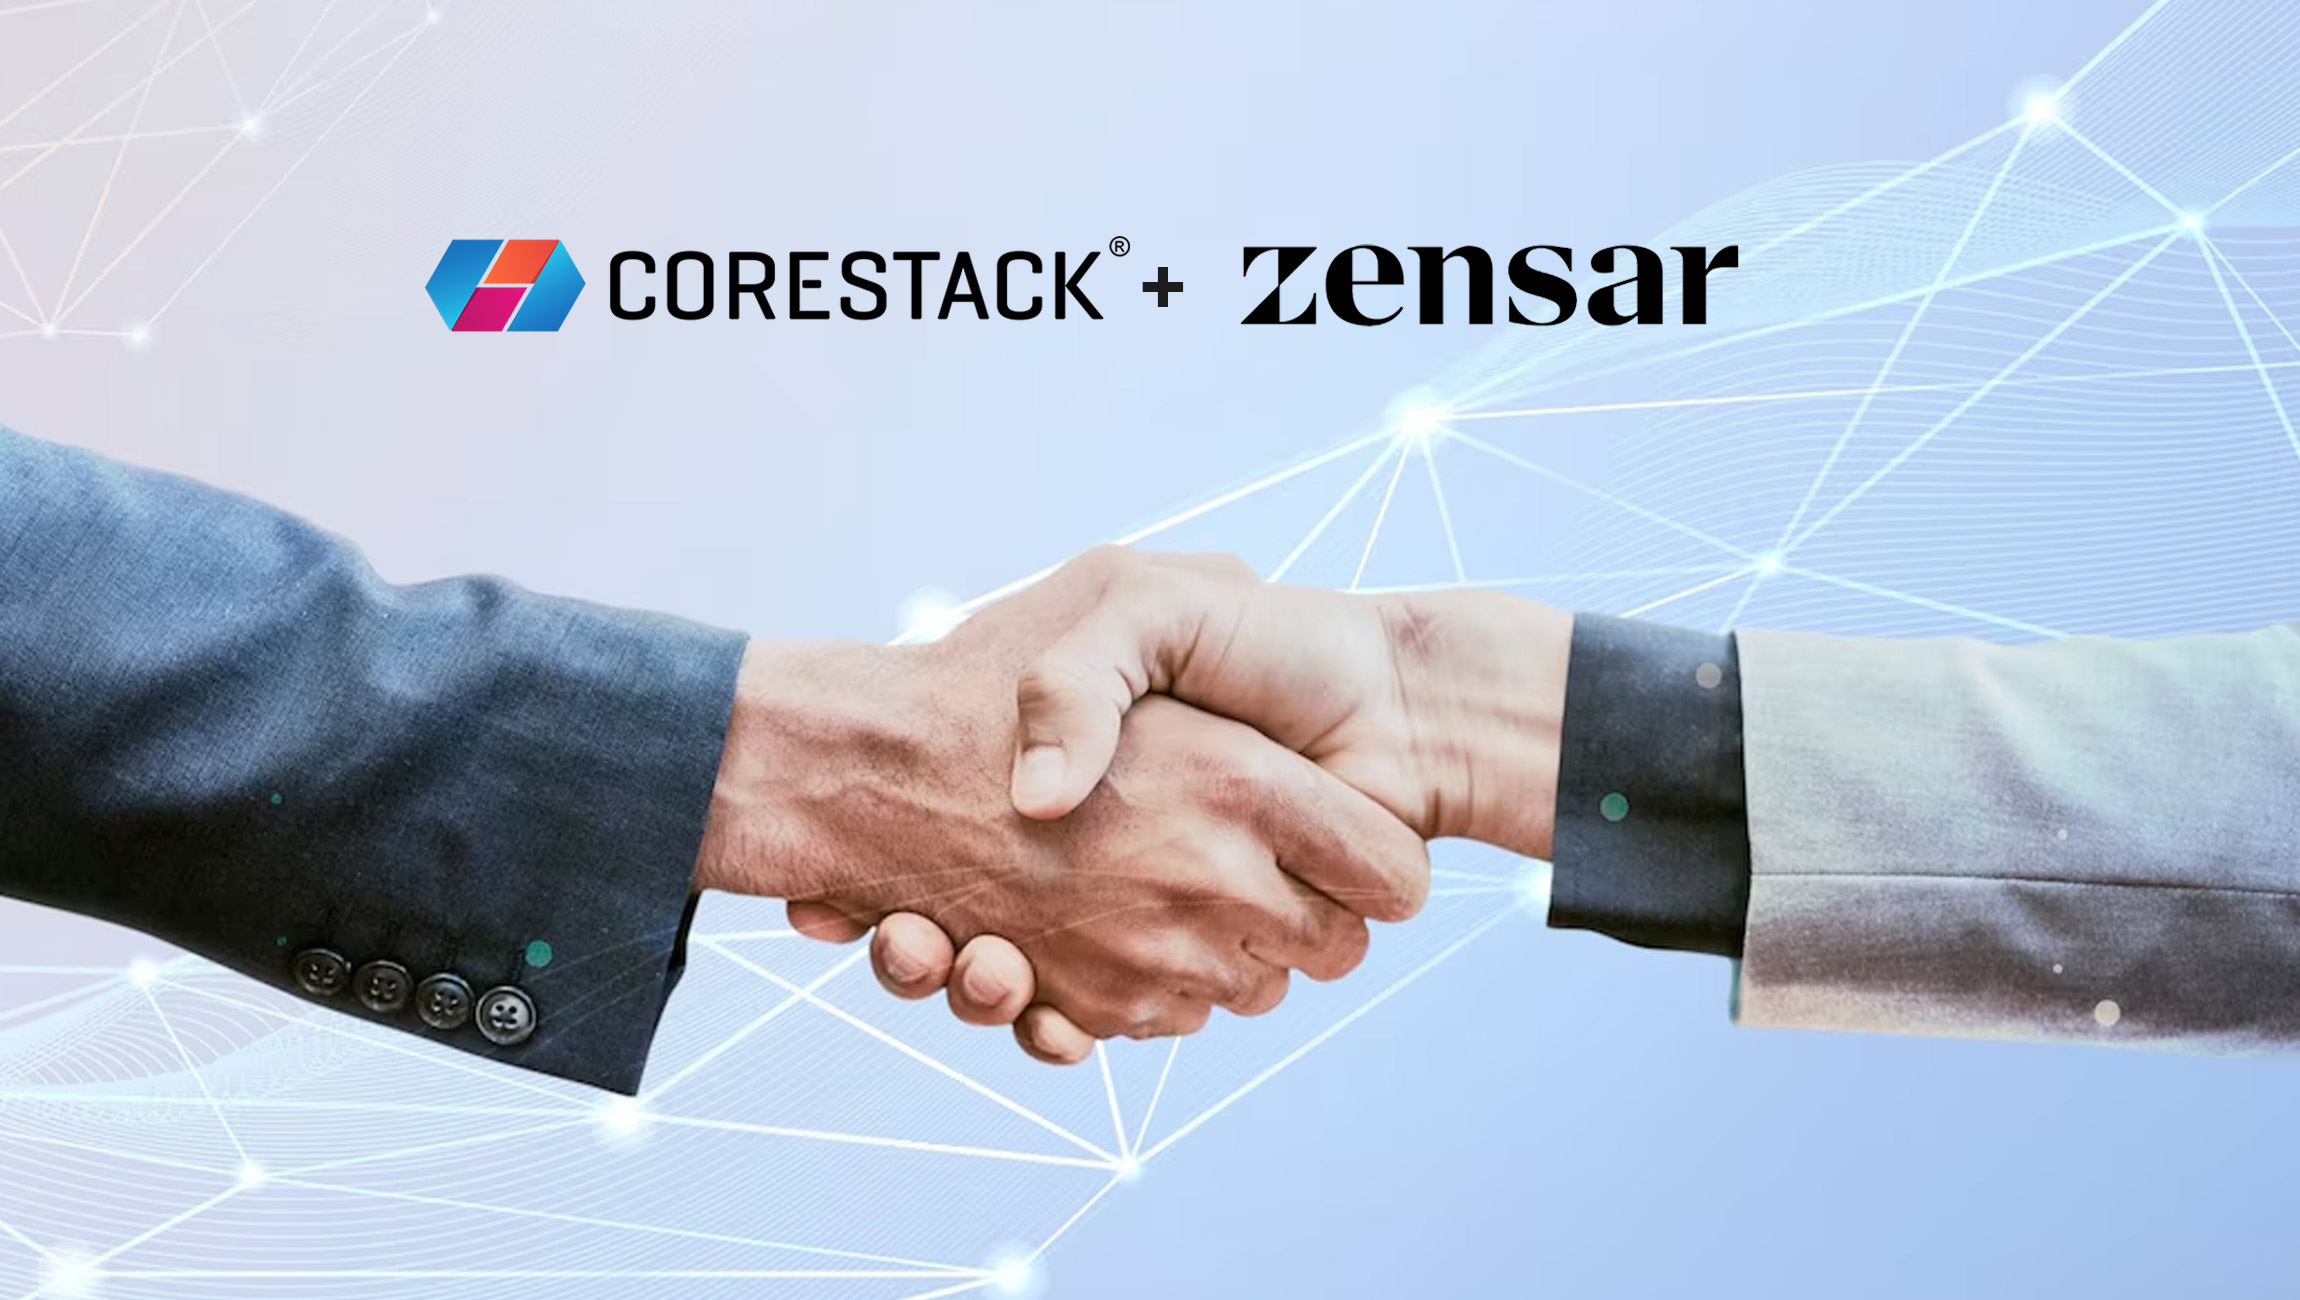 CoreStack and Zensar Announce Strategic Partnership to Empower Customers Govern, Optimize & Innovate Faster in the Cloud